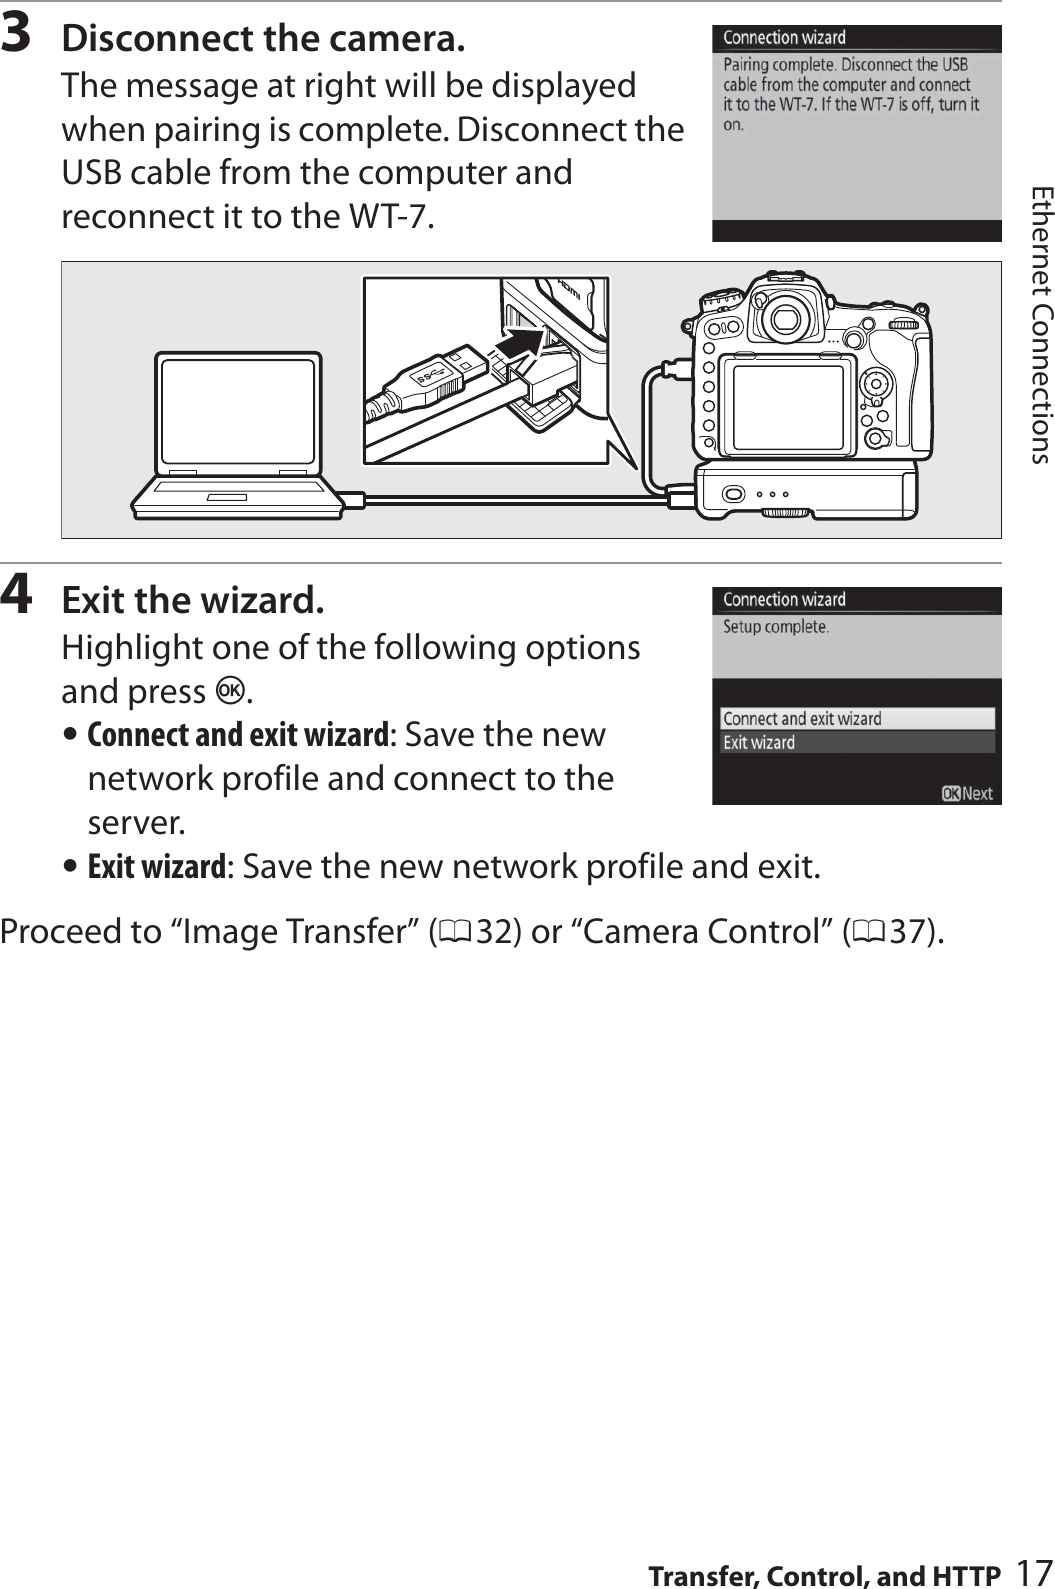 17Transfer, Control, and HTTPEthernet Connections3Disconnect the camera.The message at right will be displayed when pairing is complete. Disconnect the USB cable from the computer and reconnect it to the WT-7.4Exit the wizard.Highlight one of the following options and press J.•Connect and exit wizard: Save the new network profile and connect to the server.•Exit wizard: Save the new network profile and exit.Proceed to “Image Transfer” (032) or “Camera Control” (037).